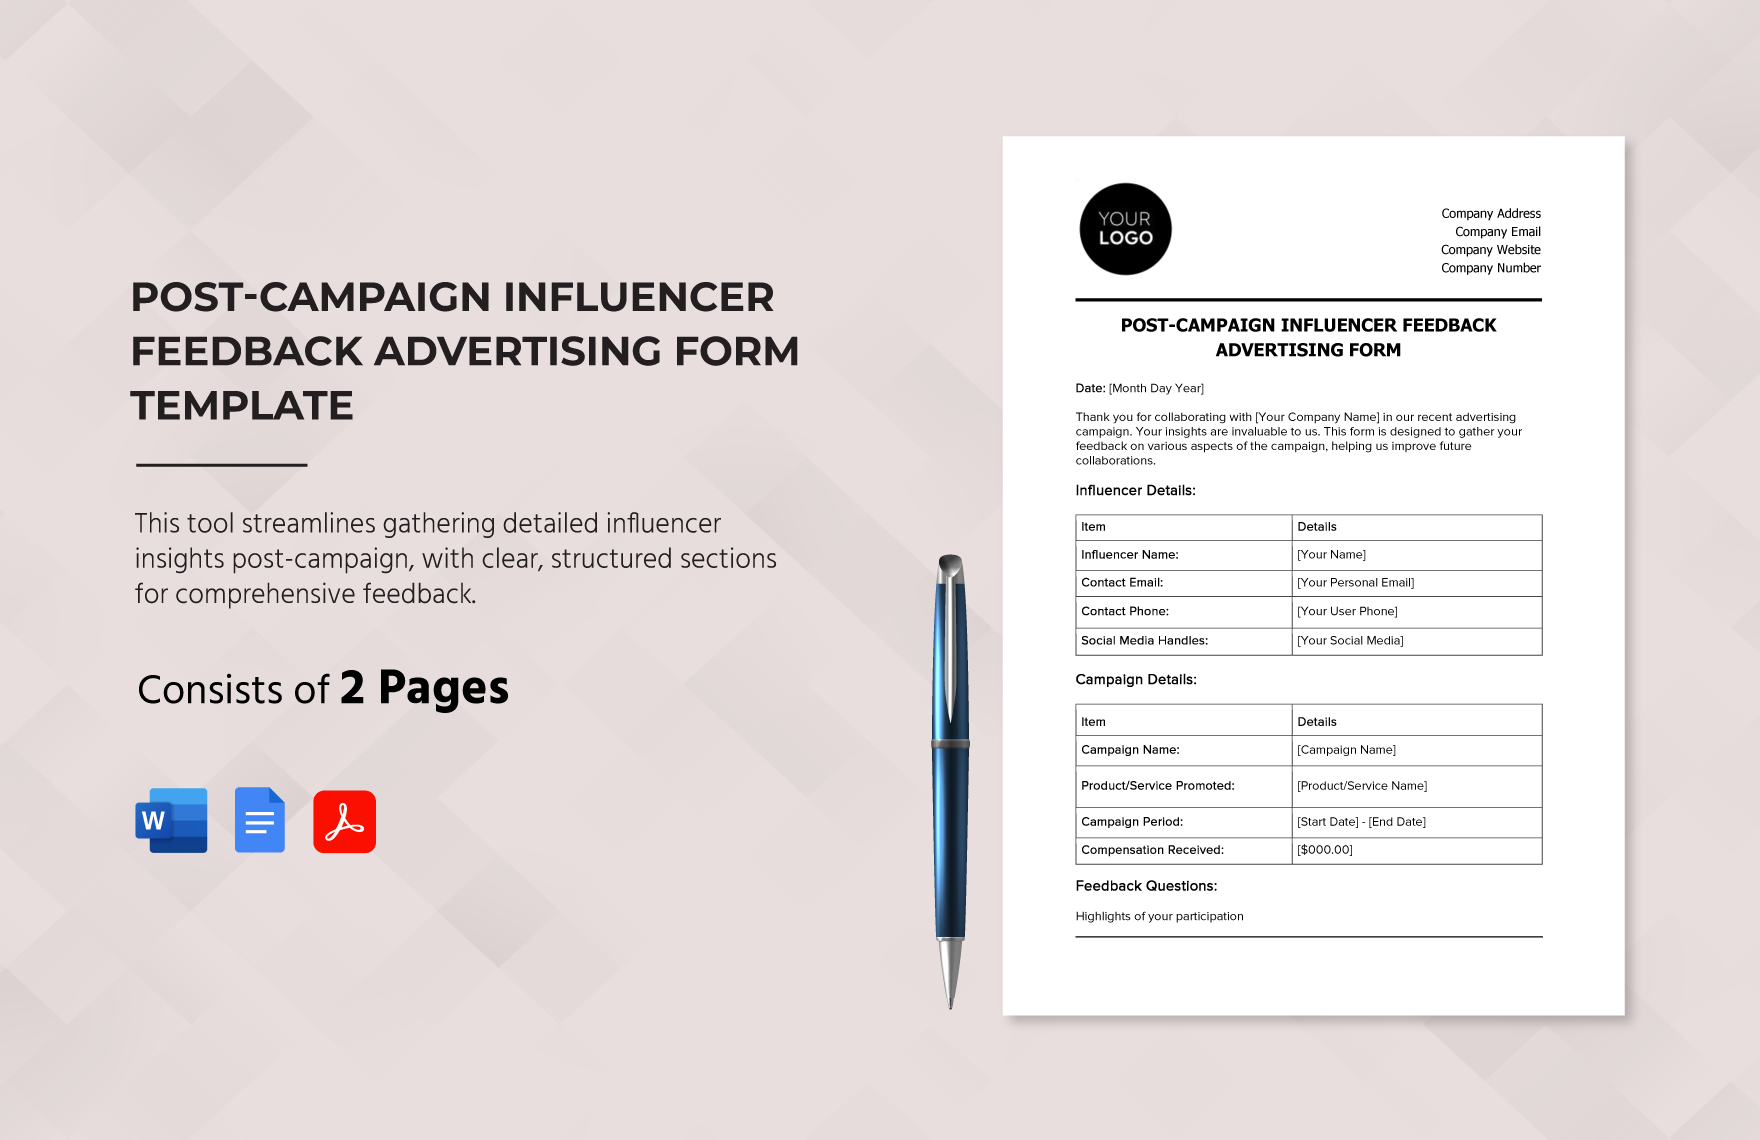 Post-Campaign Influencer Feedback Advertising Form Template in Word, Google Docs, PDF